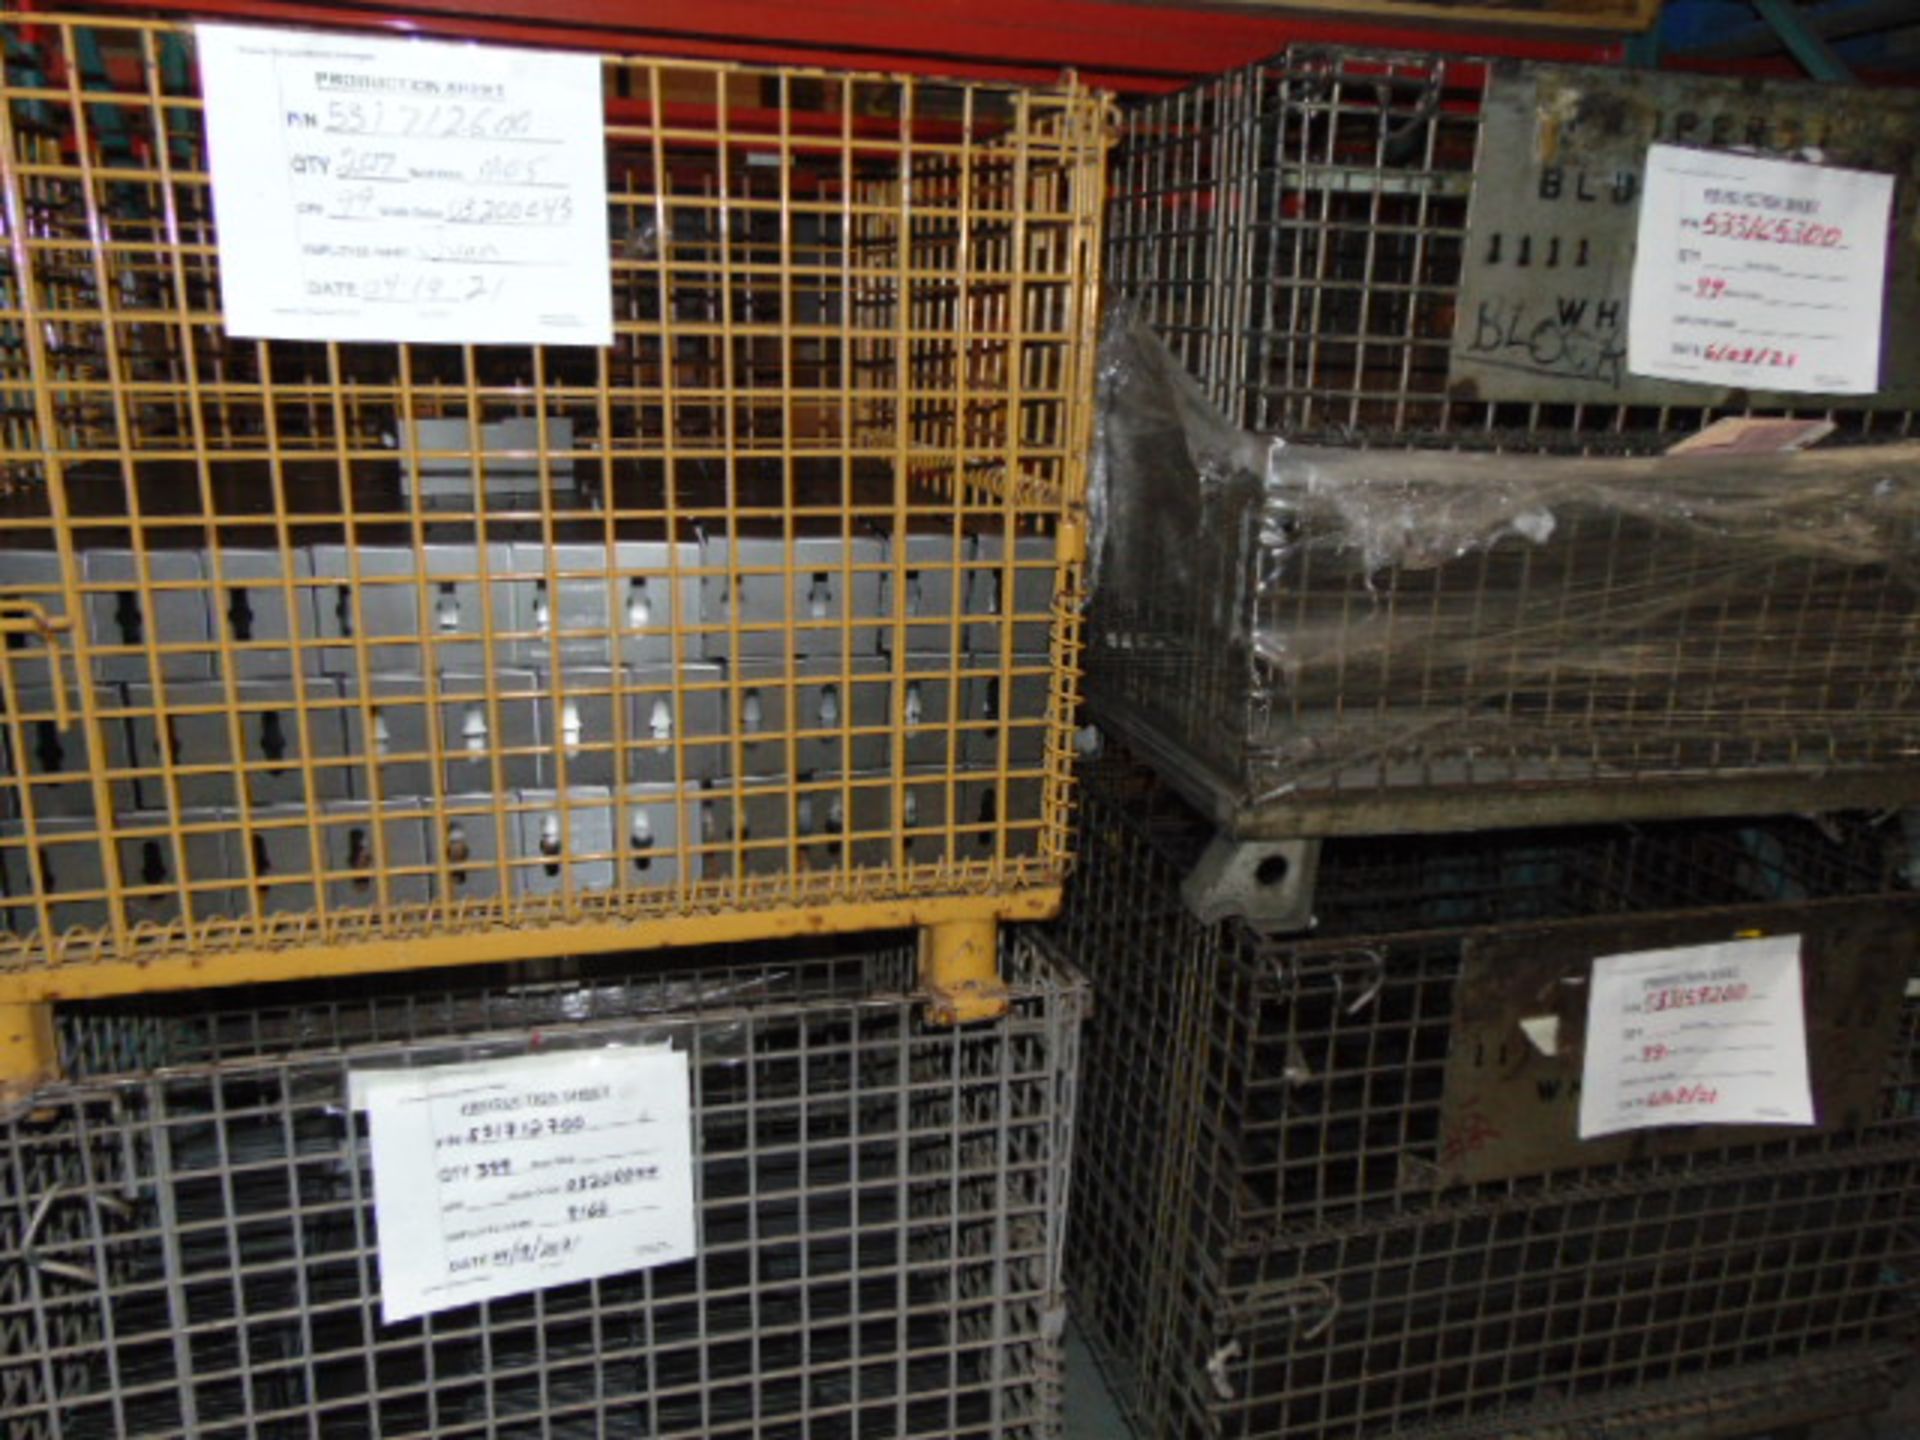 LOT CONSISTING OF: assorted steel in process parts, wire baskets & cardboard (no dies or racks) ( - Image 18 of 39